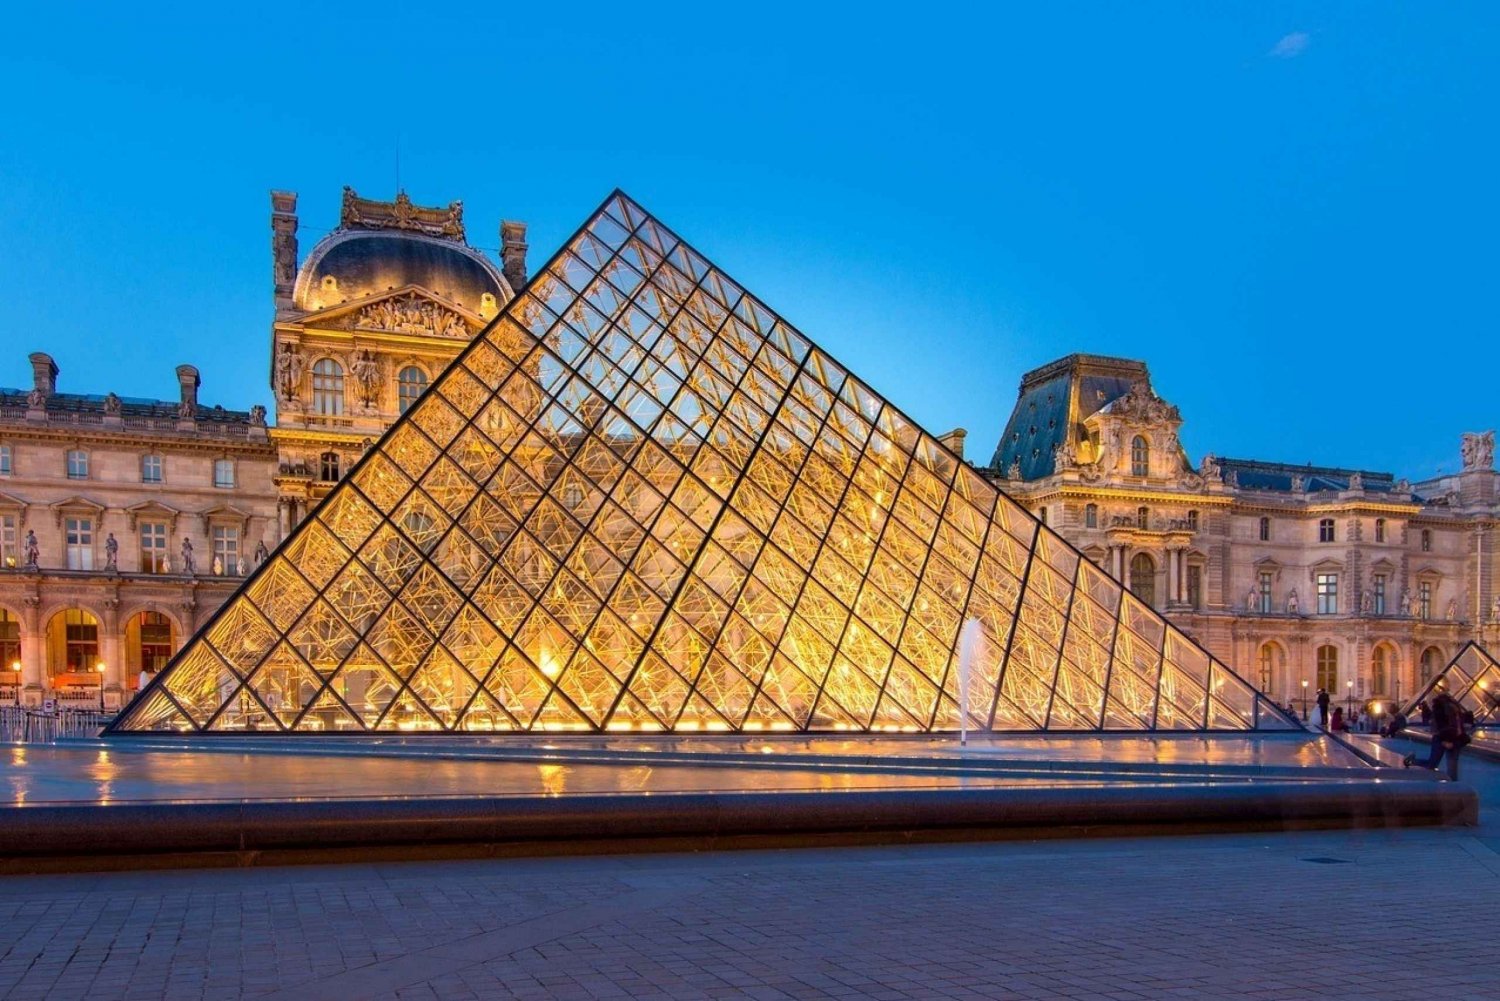 Paris: Louvre Museum Entry Ticket and Seine River Cruise